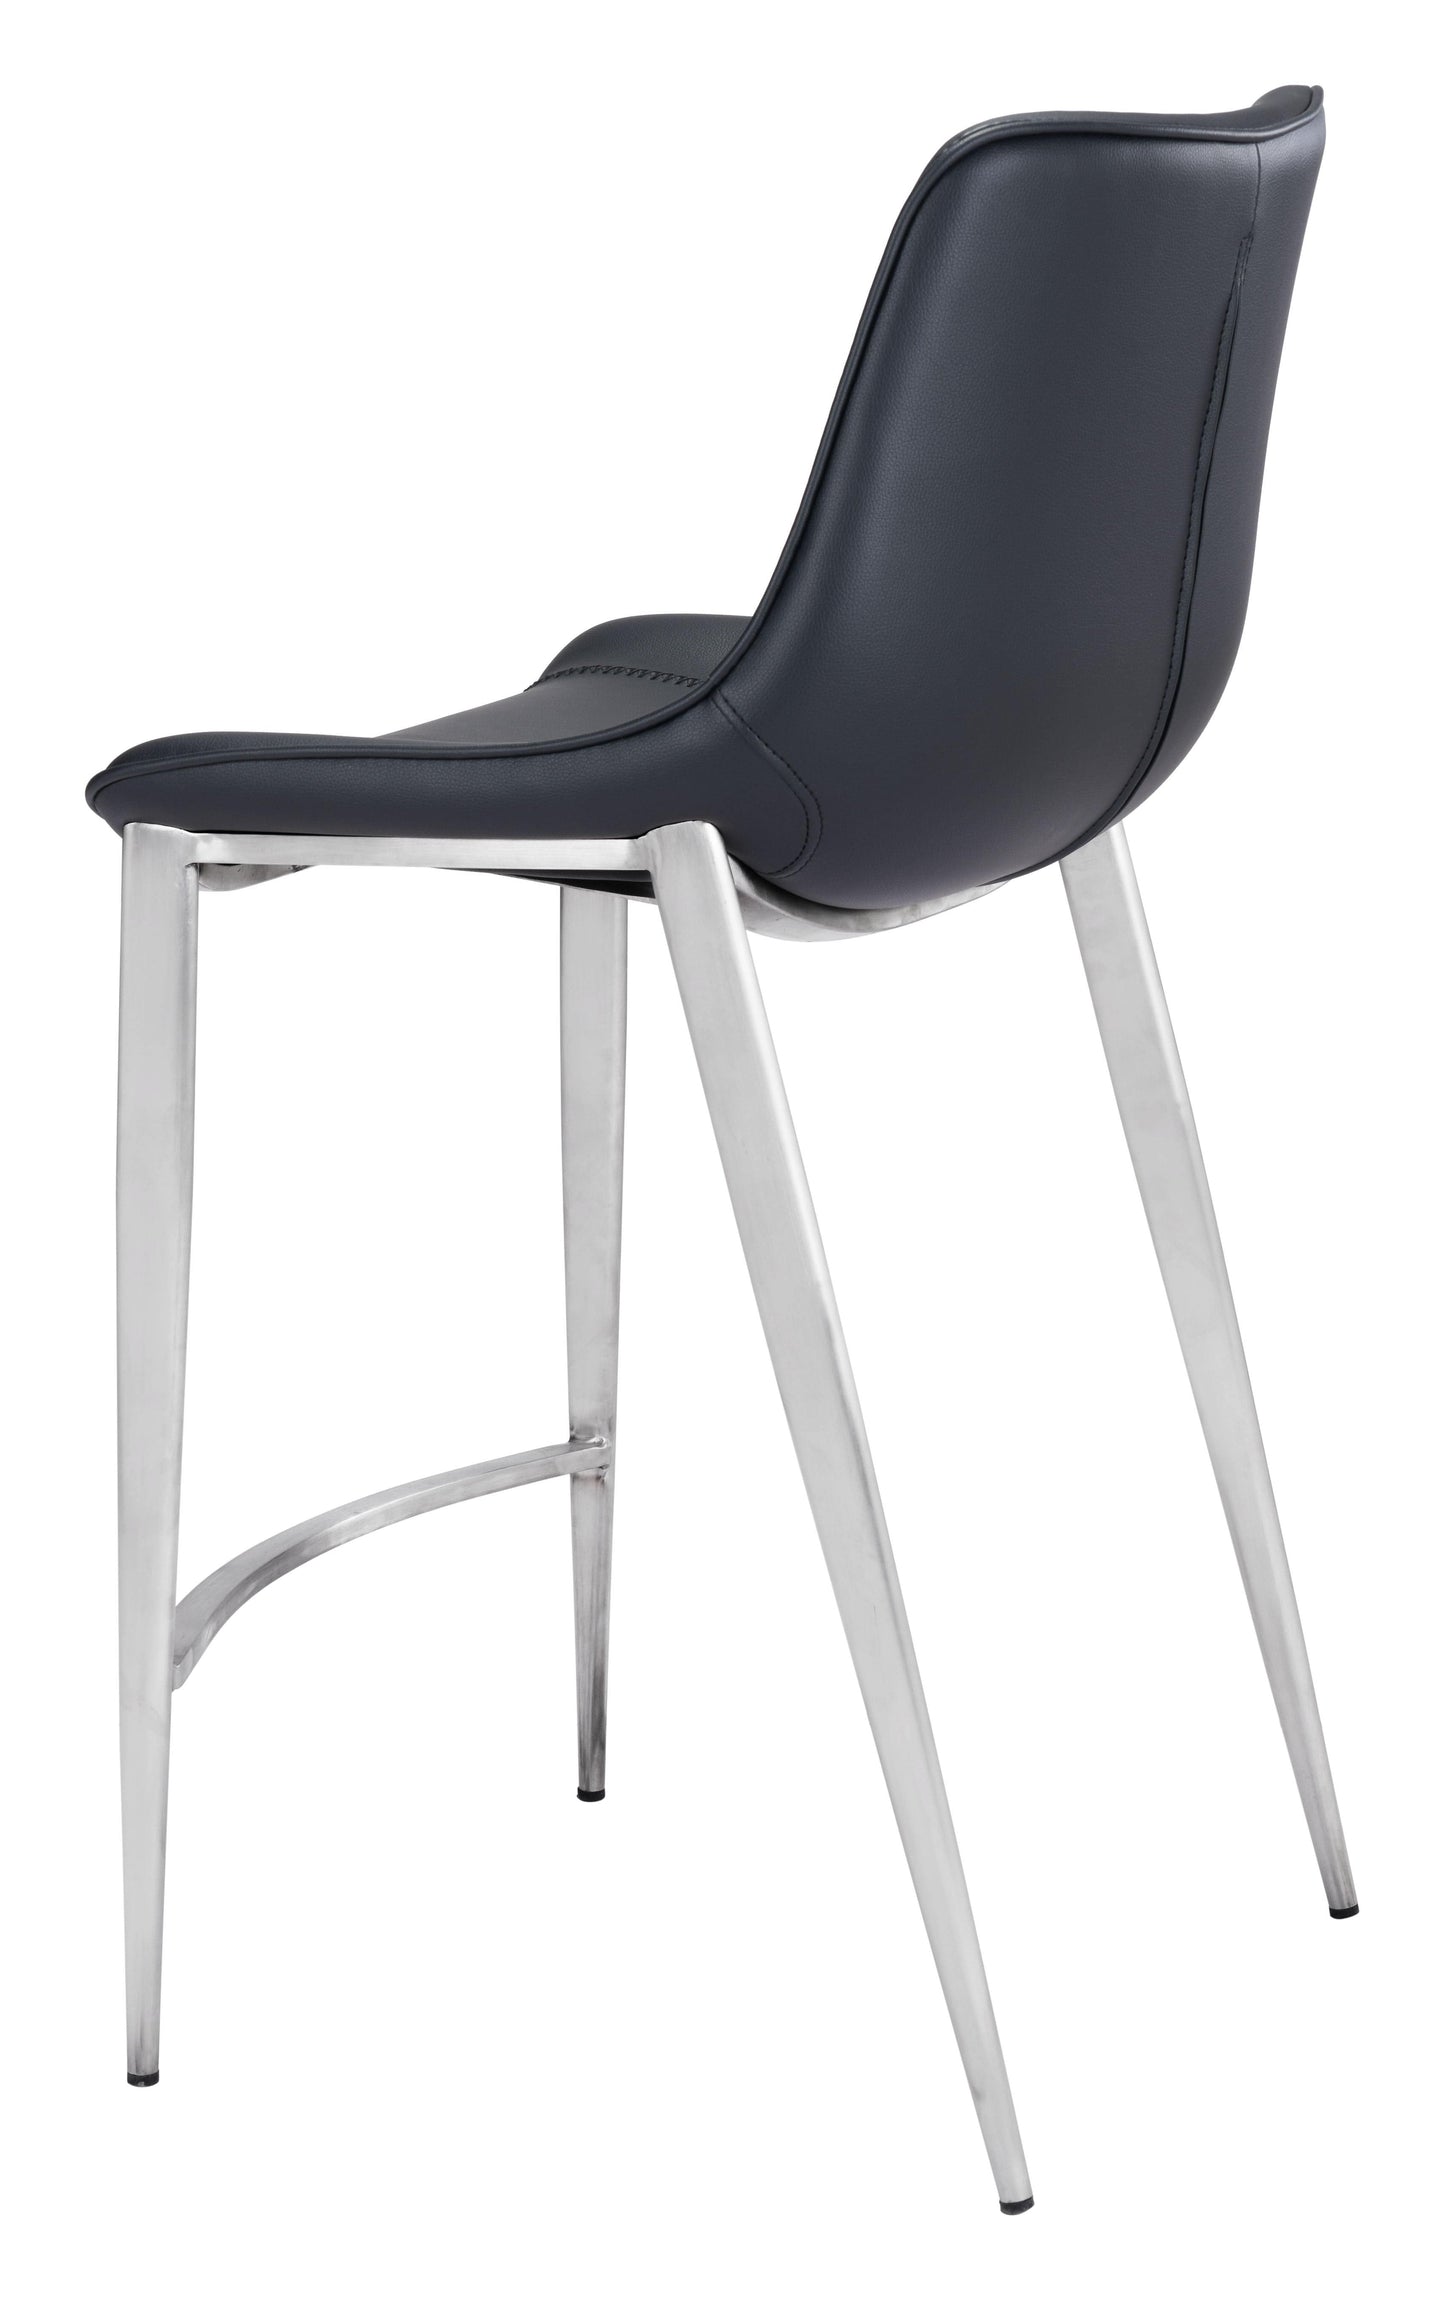 Angled Back View of Modern Chair